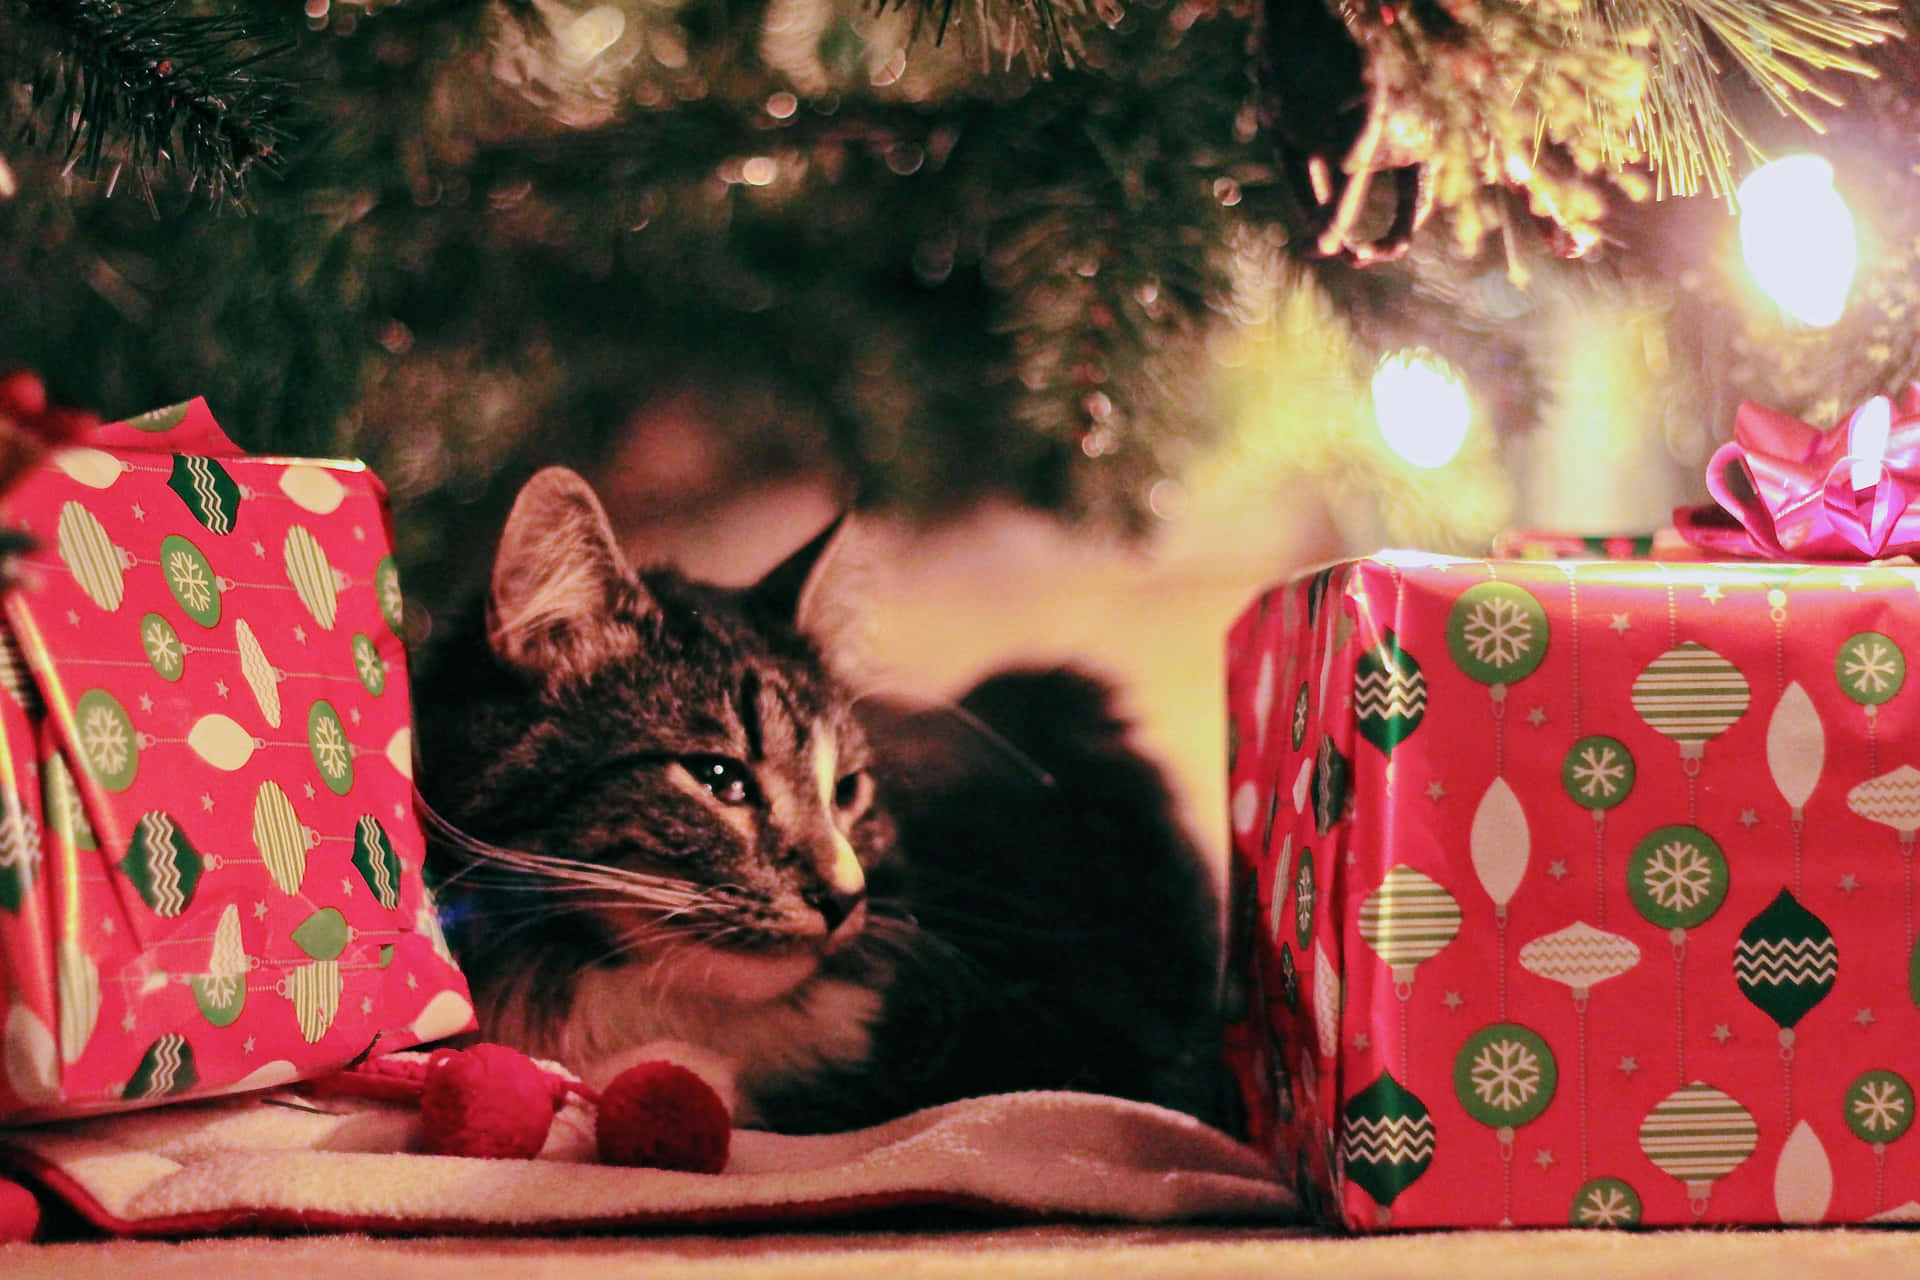 Festive Christmas Catwith Gifts.jpg Wallpaper